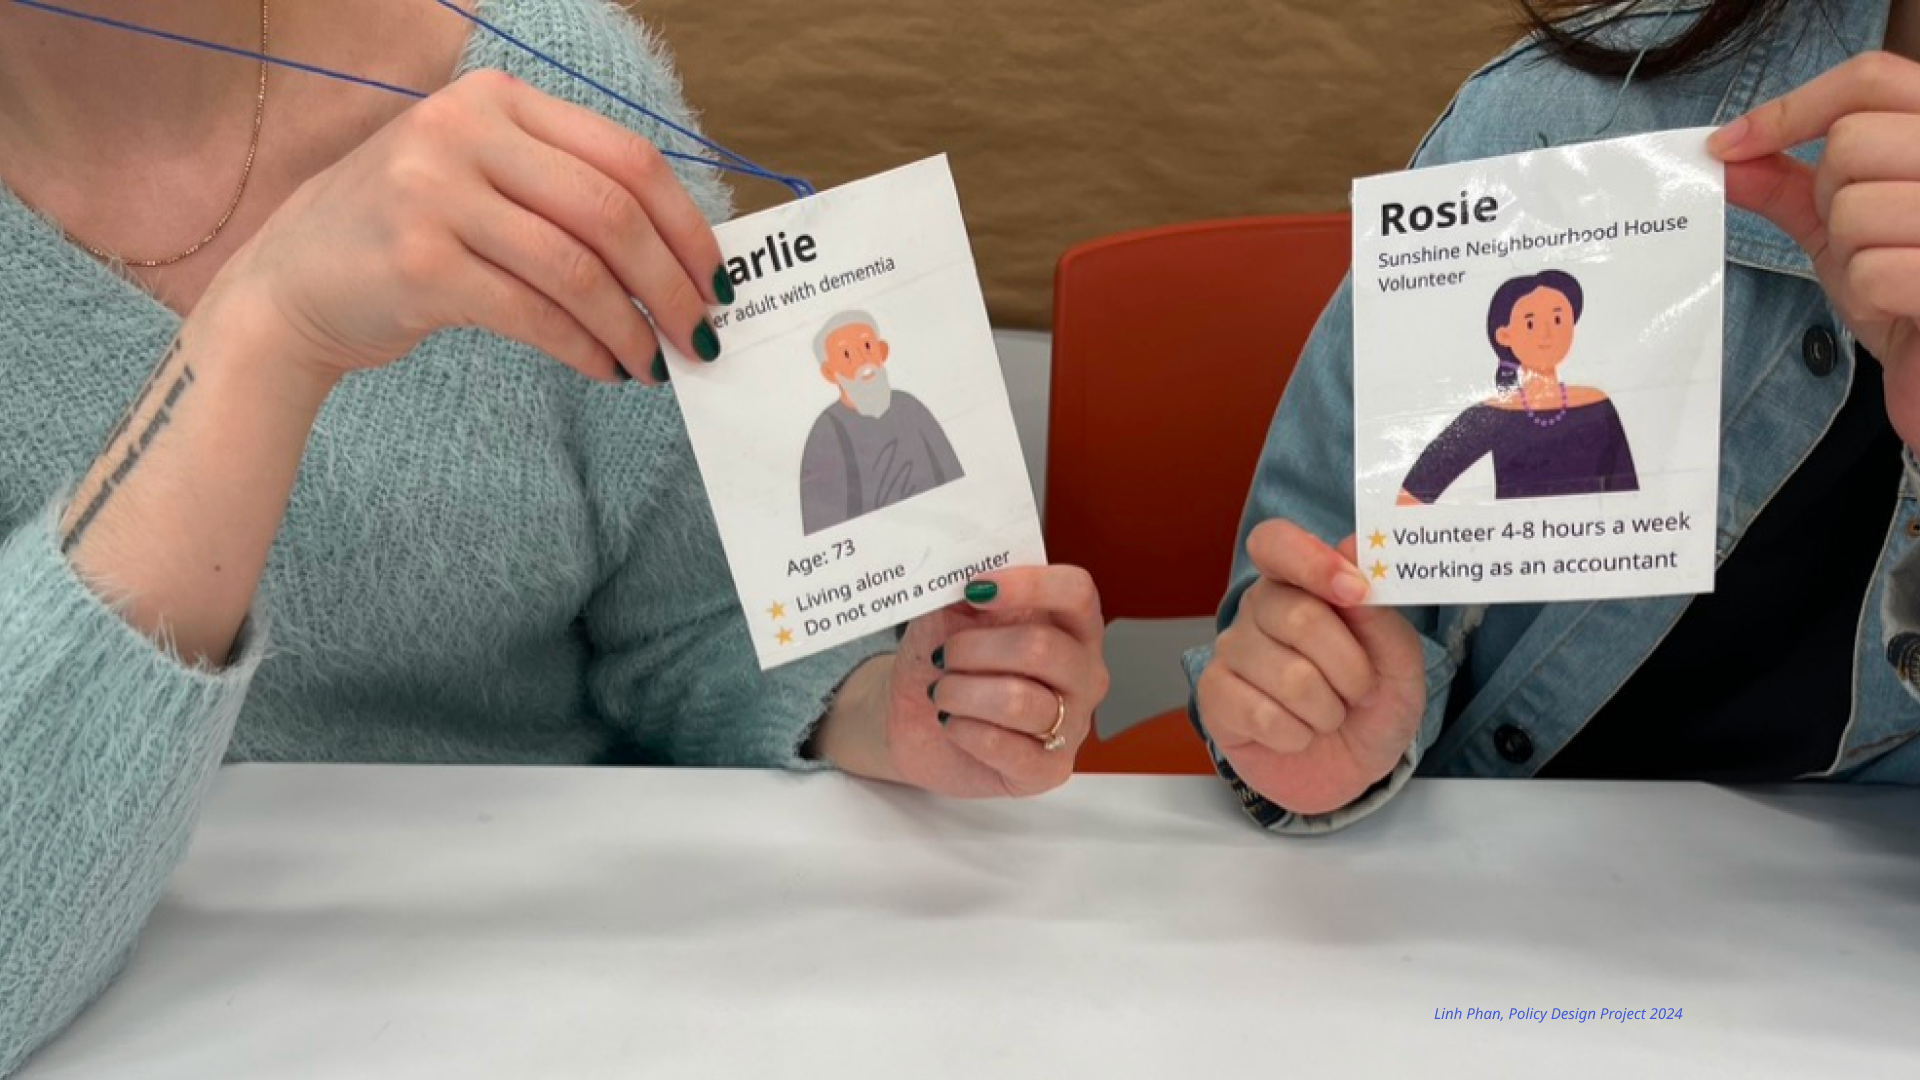 Example of Roleplay activity in the workshops. Two person wearing character tag facing each other. The first person wear a tag for a character name Charlie, who is an older adult with dementia, live alone and don't have access to the computer. The second person is wearing a tag for a character name Rosie, who is a volunteer for Sunshine Neighbourhood House. This activity aims to simulate future scenarios in order to find area of improvements for the service